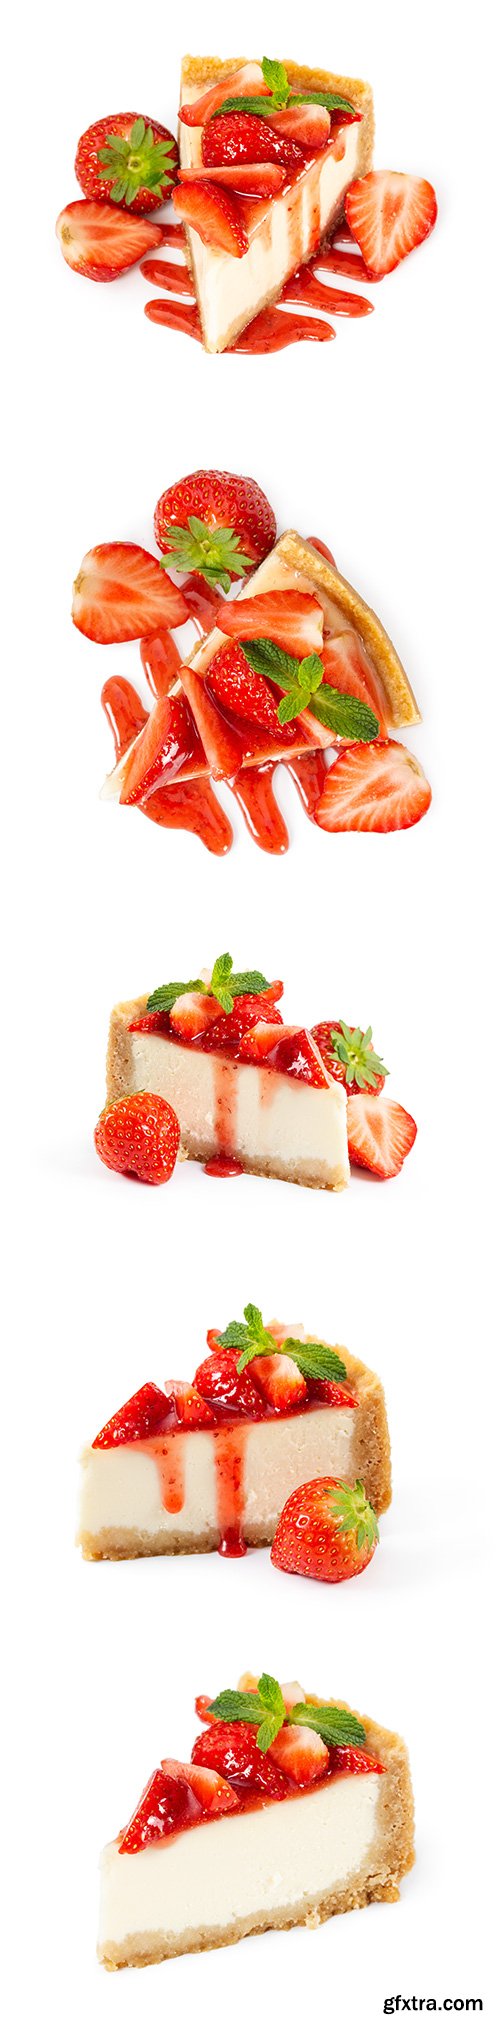 Piece Of Cheesecake With Fresh Strawberries Isolated - 7xJPGs